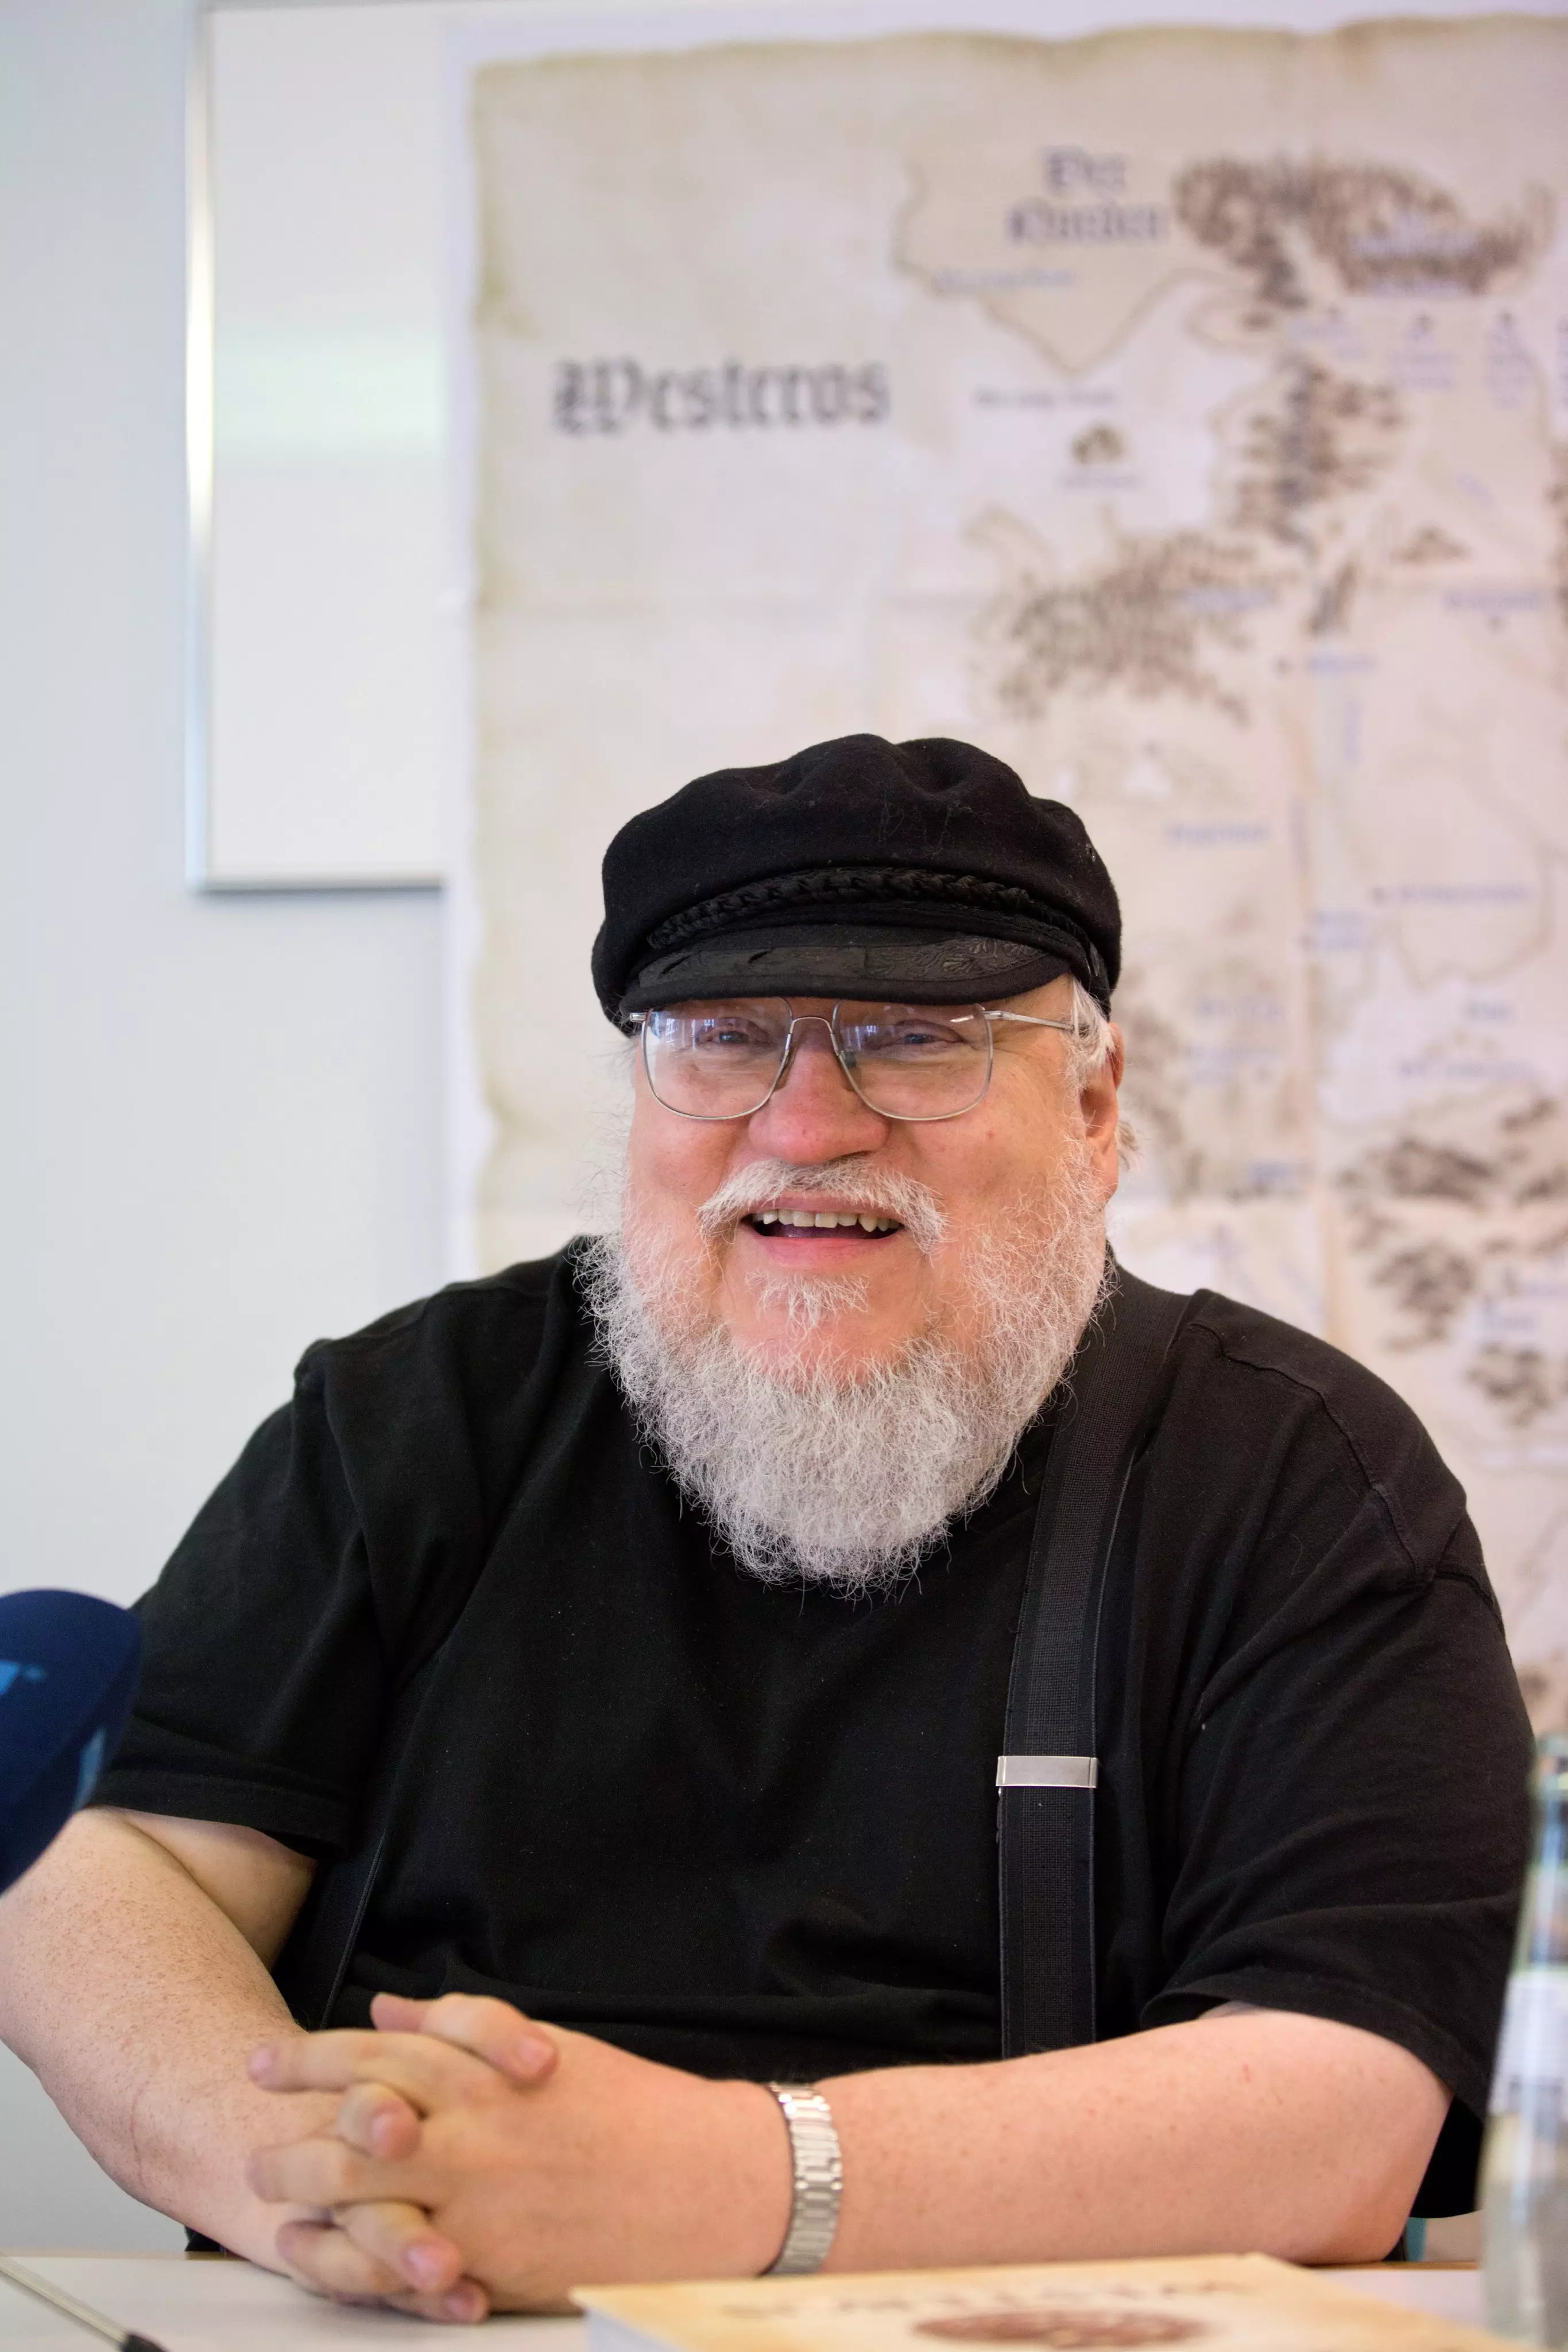 George RR Martin says the next book int he franchise will be ready next year (